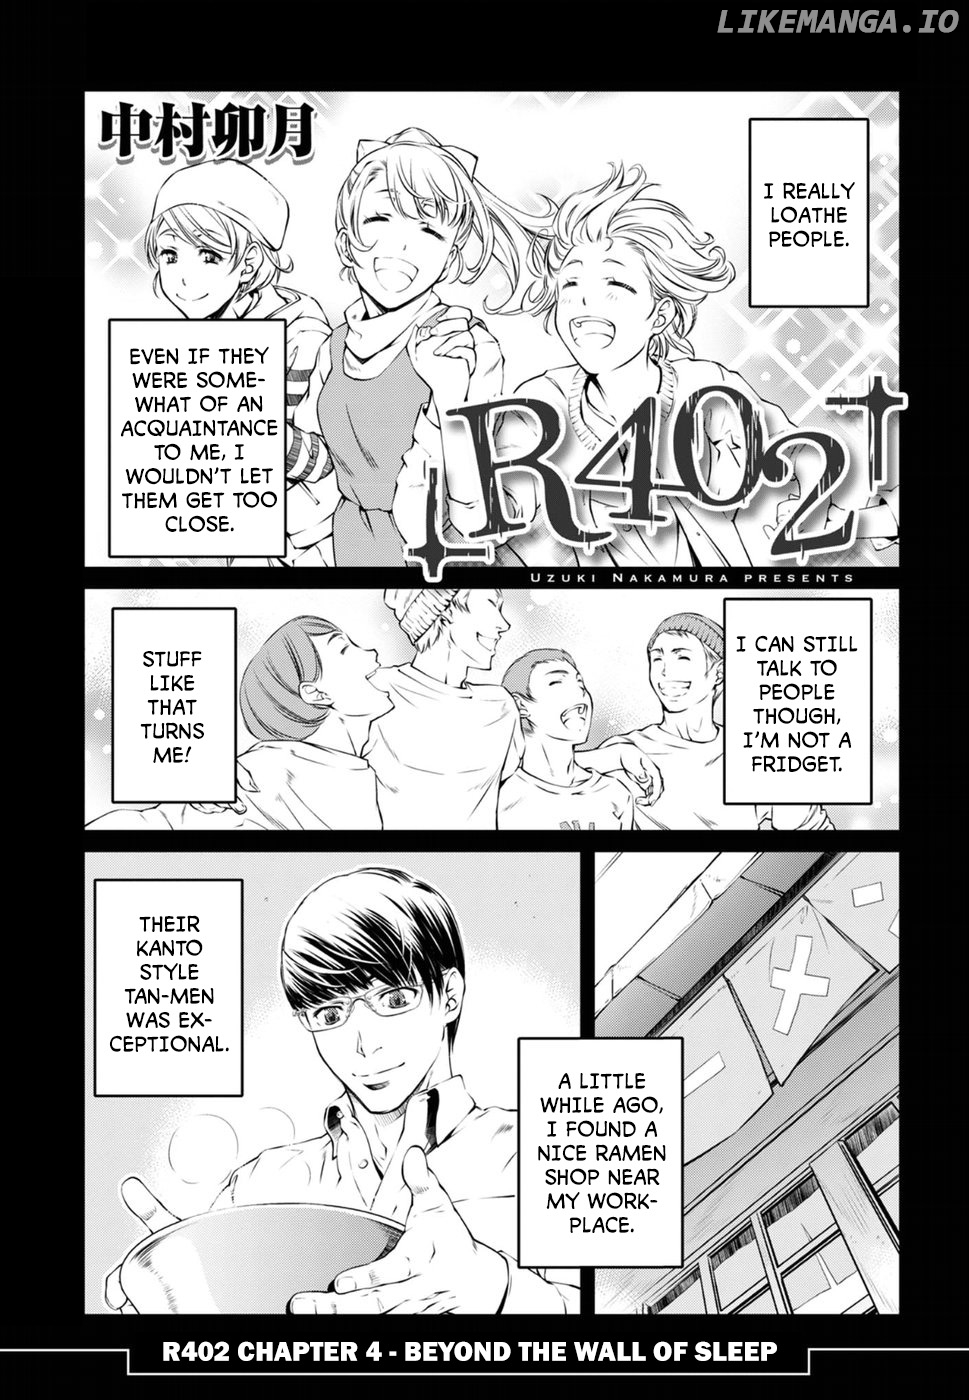 r402 chapter 4 - page 1